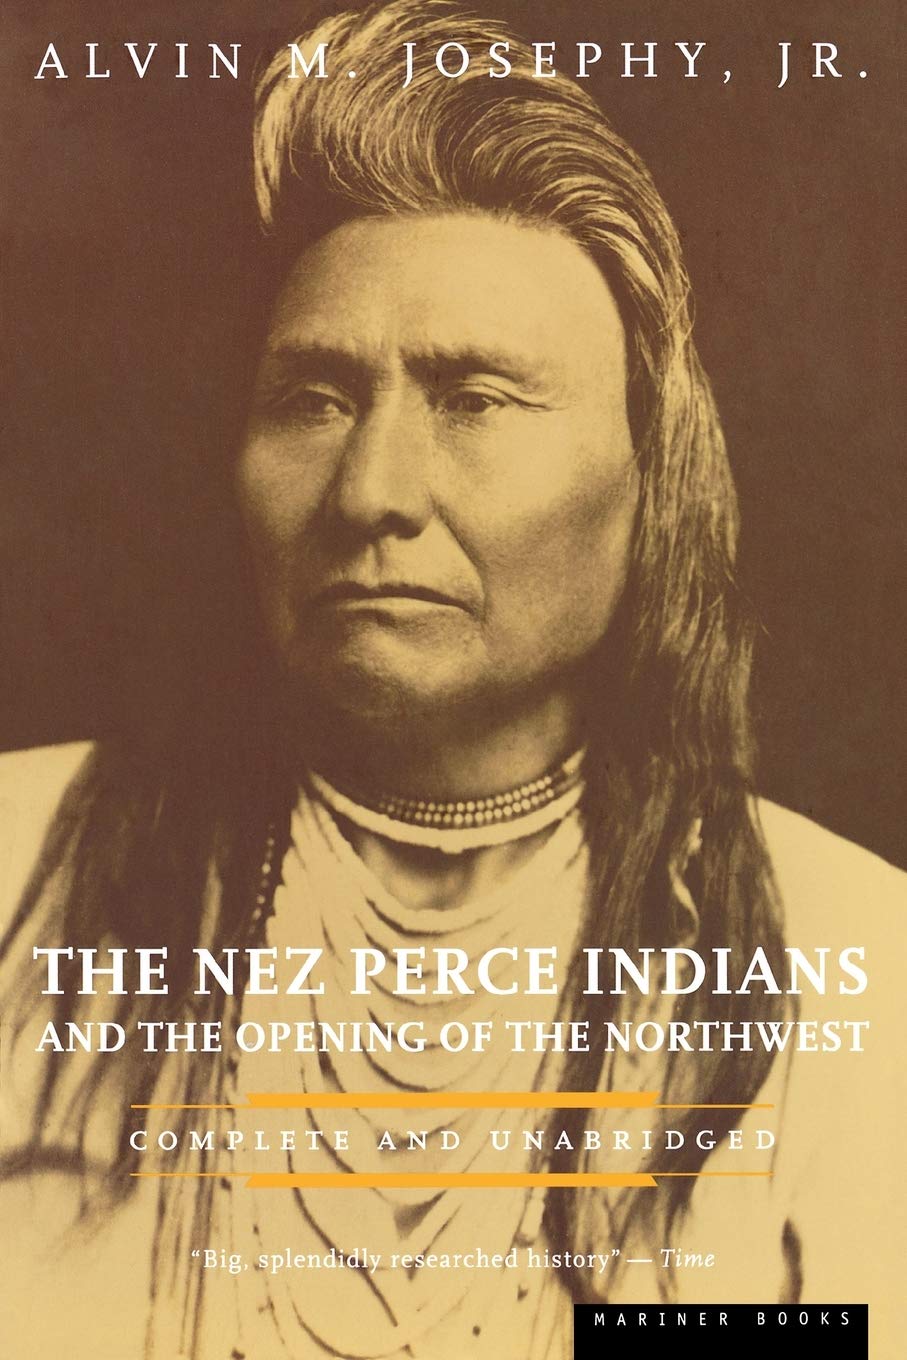 The Nez Perce Indians and the opening of the Northwest (book cover)